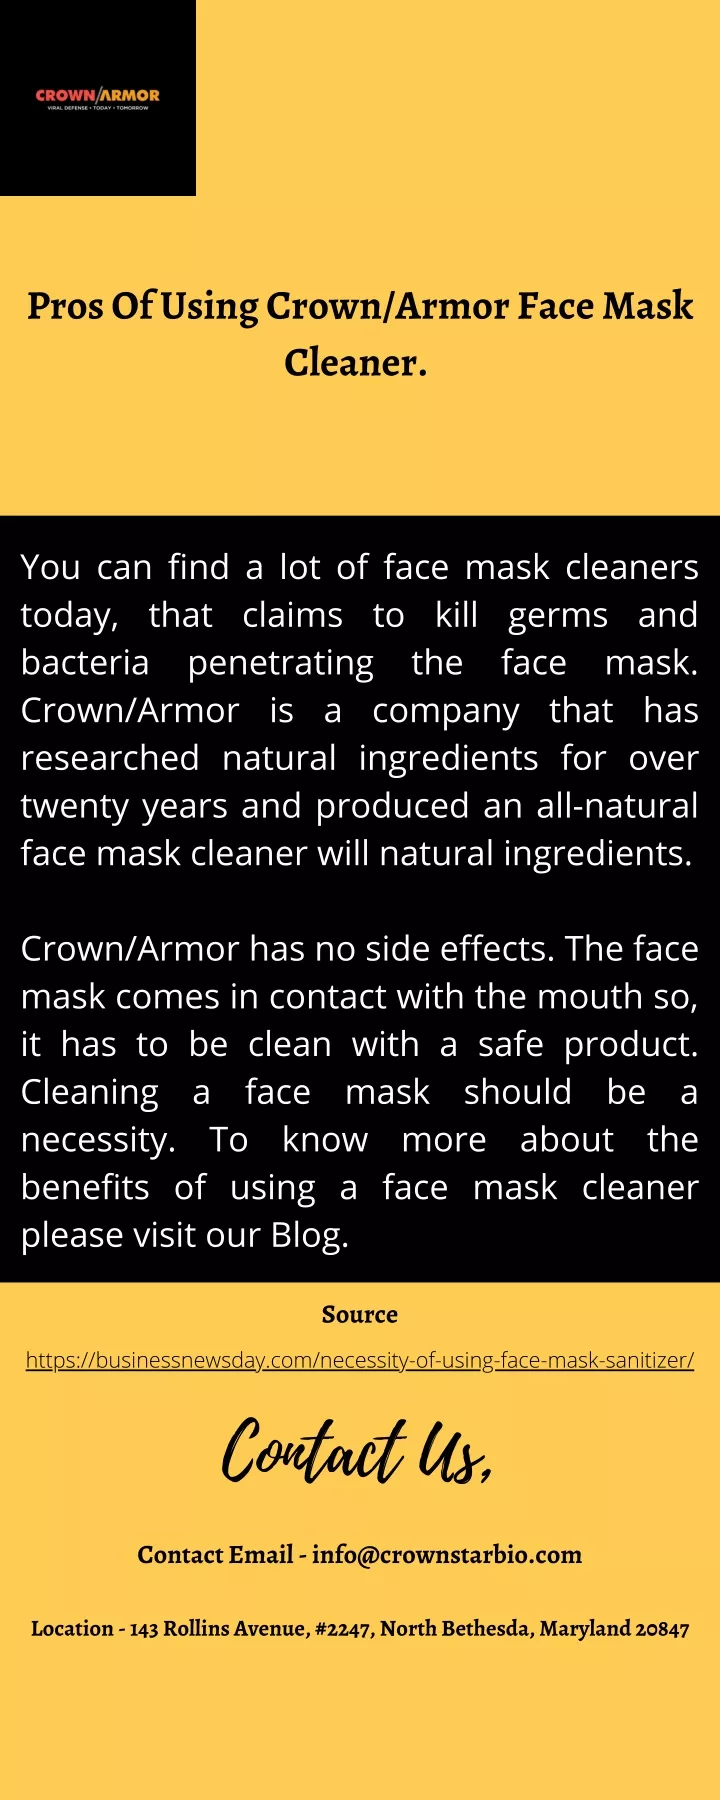 pros of using crown armor face mask cleaner